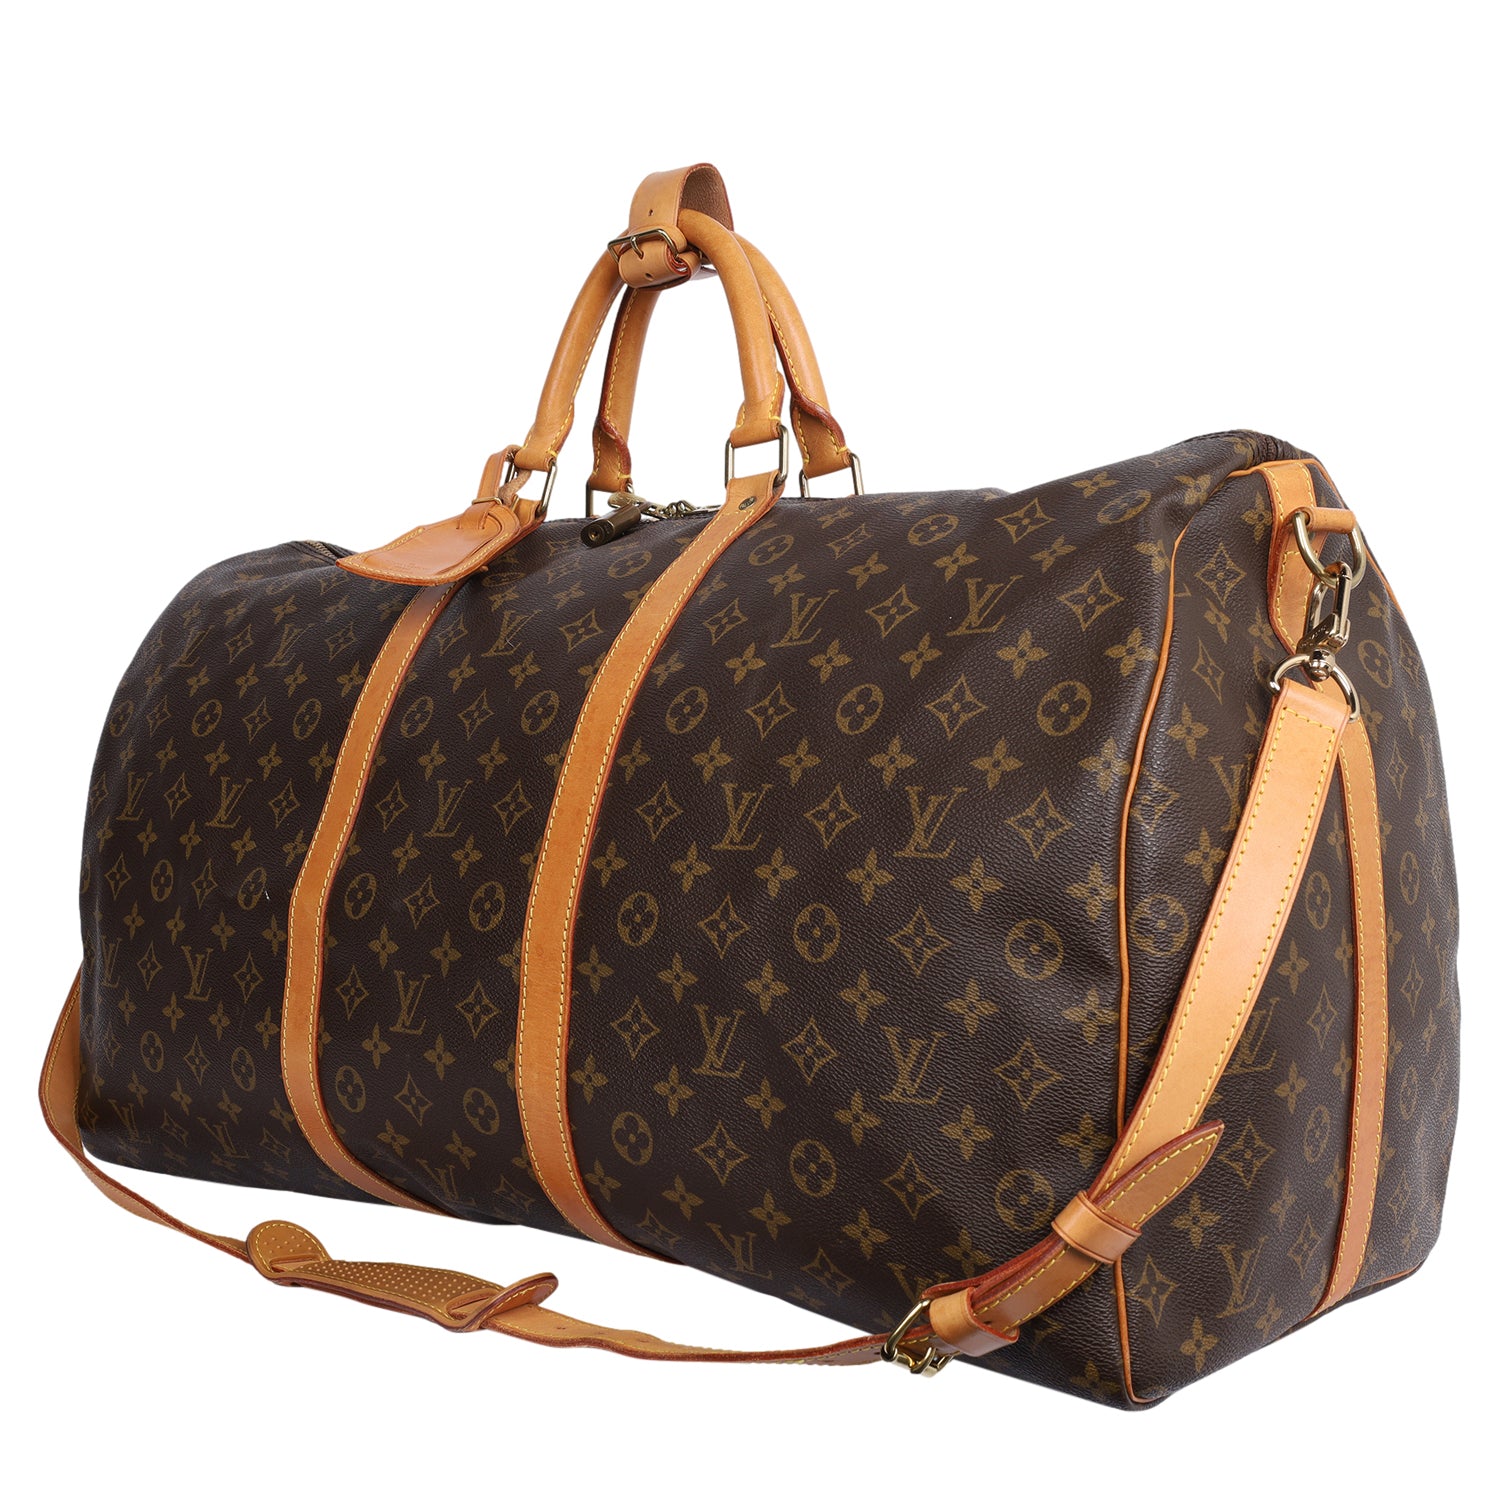 Monogram Canvas Keepall 60 Bandouliere (Authentic Pre-Owned) – The